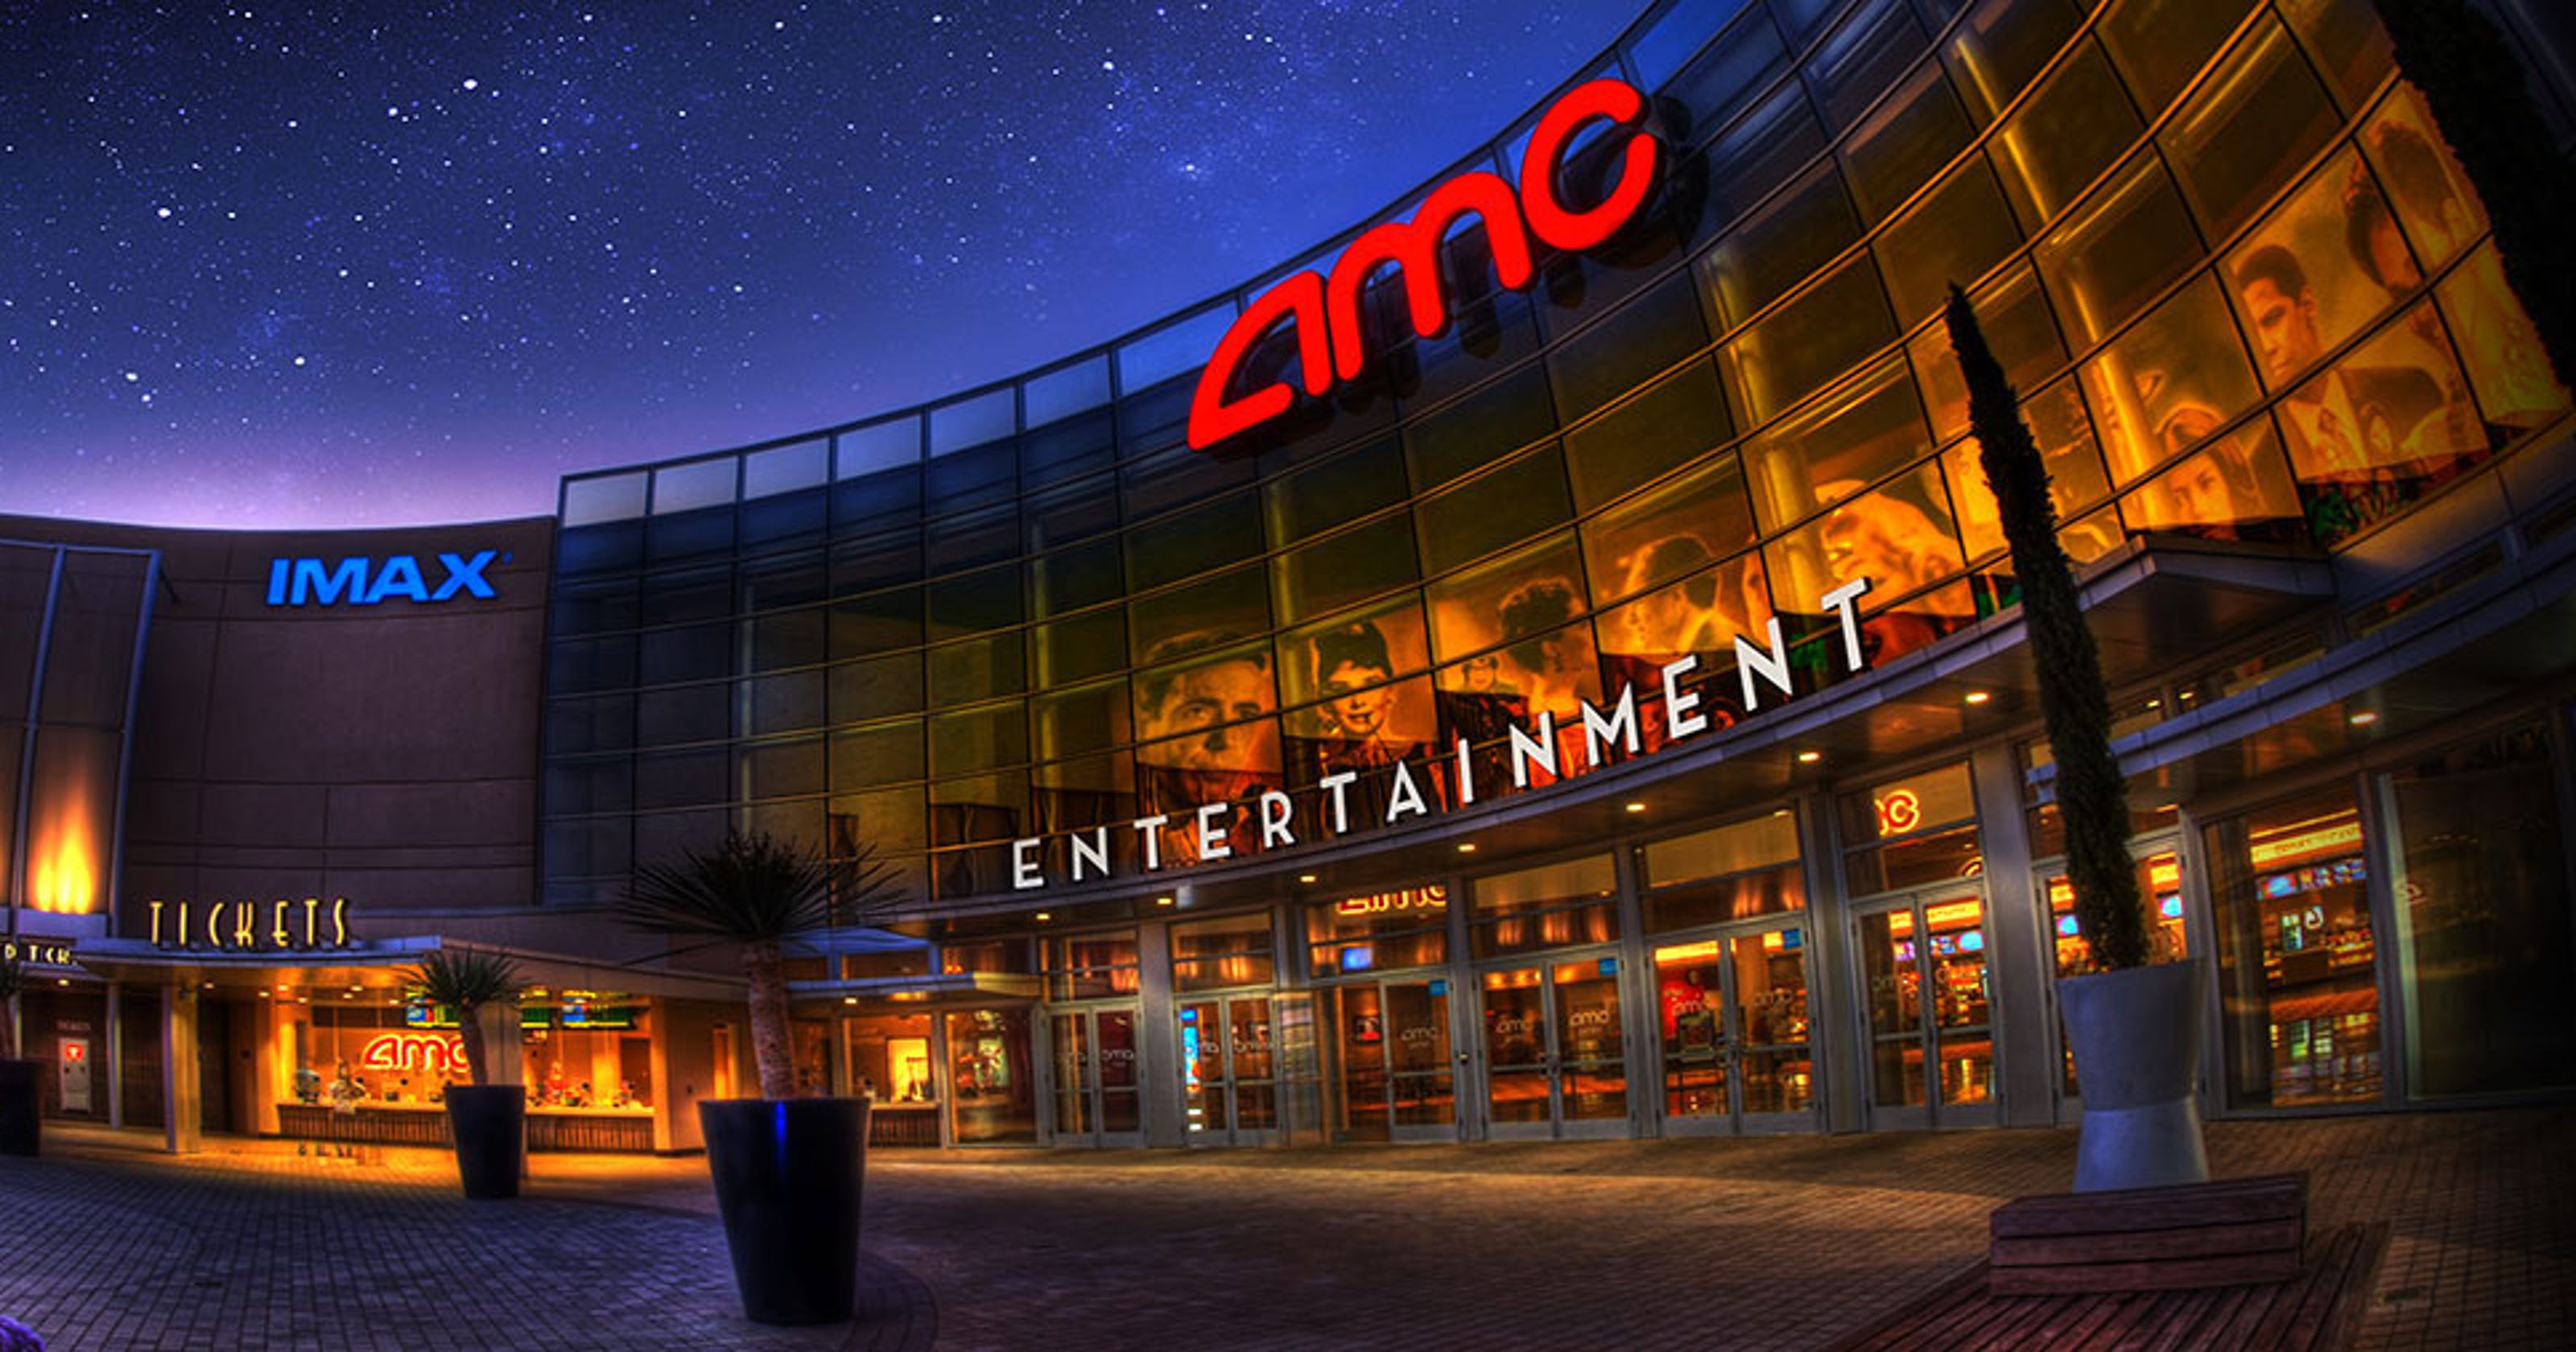 New IMAX screens may be headed to an AMC theater near you